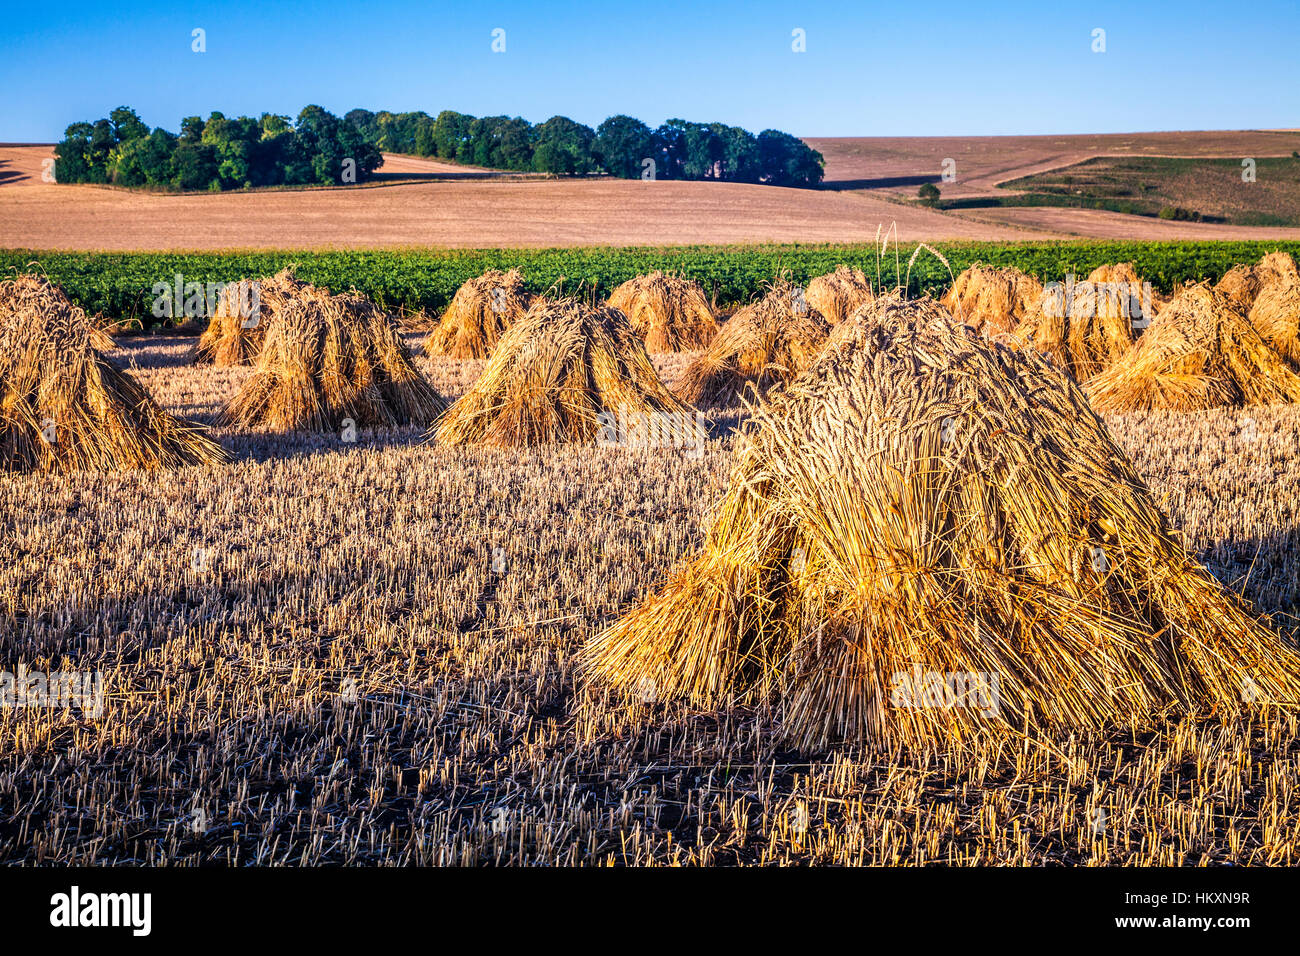 Traditional stooks of wheat in a field in Wiltshire, UK. Stock Photo